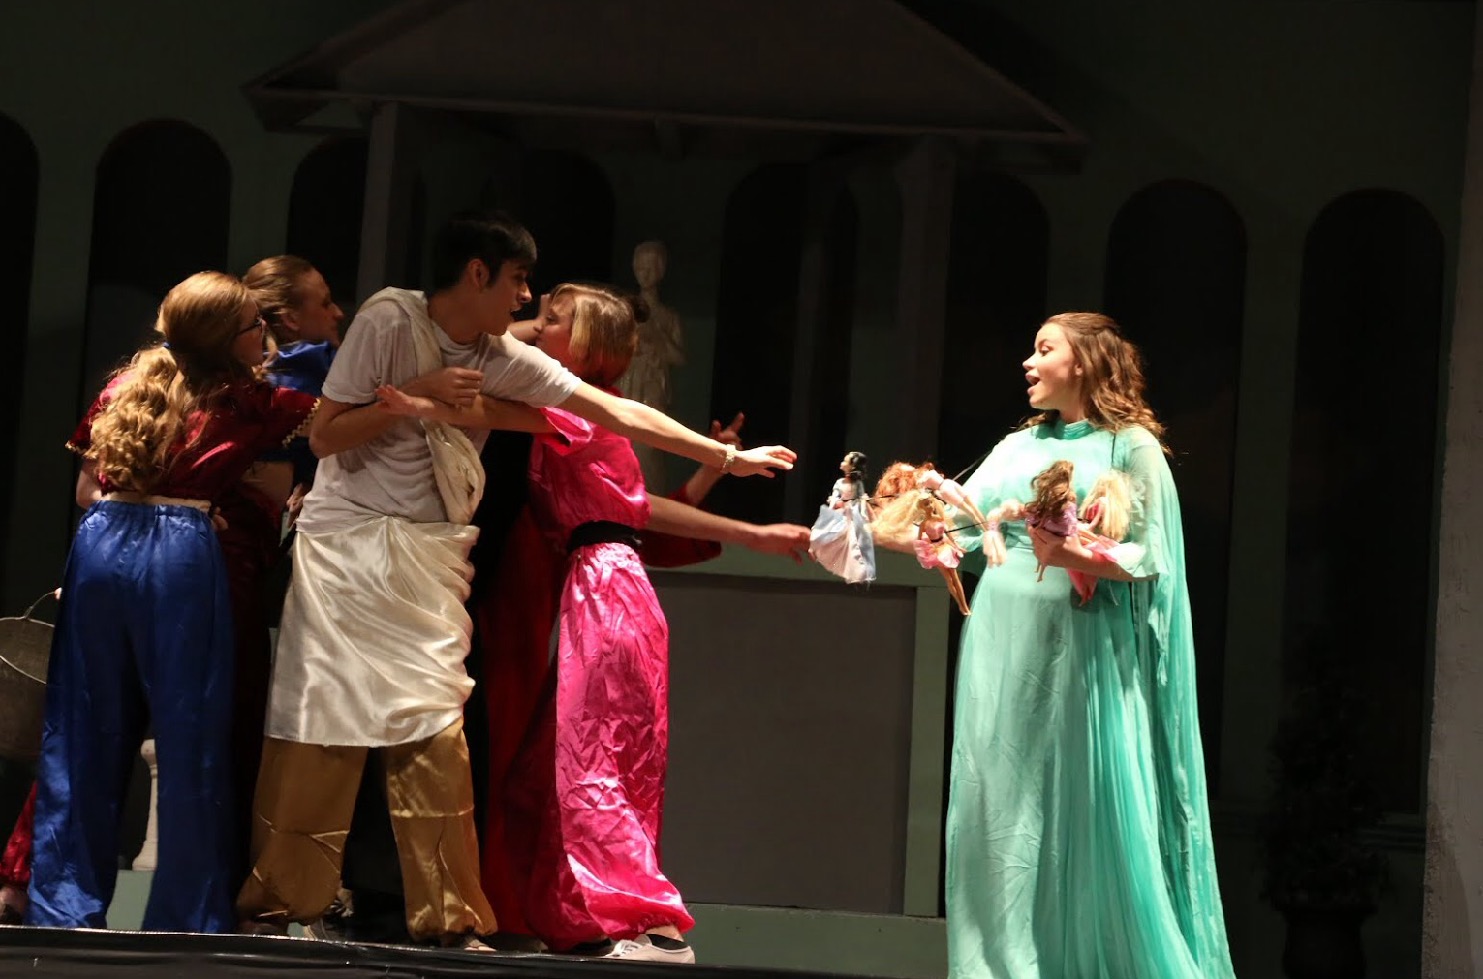 St. Edward's student cast of two years ago performing a play by Don Zolidis.